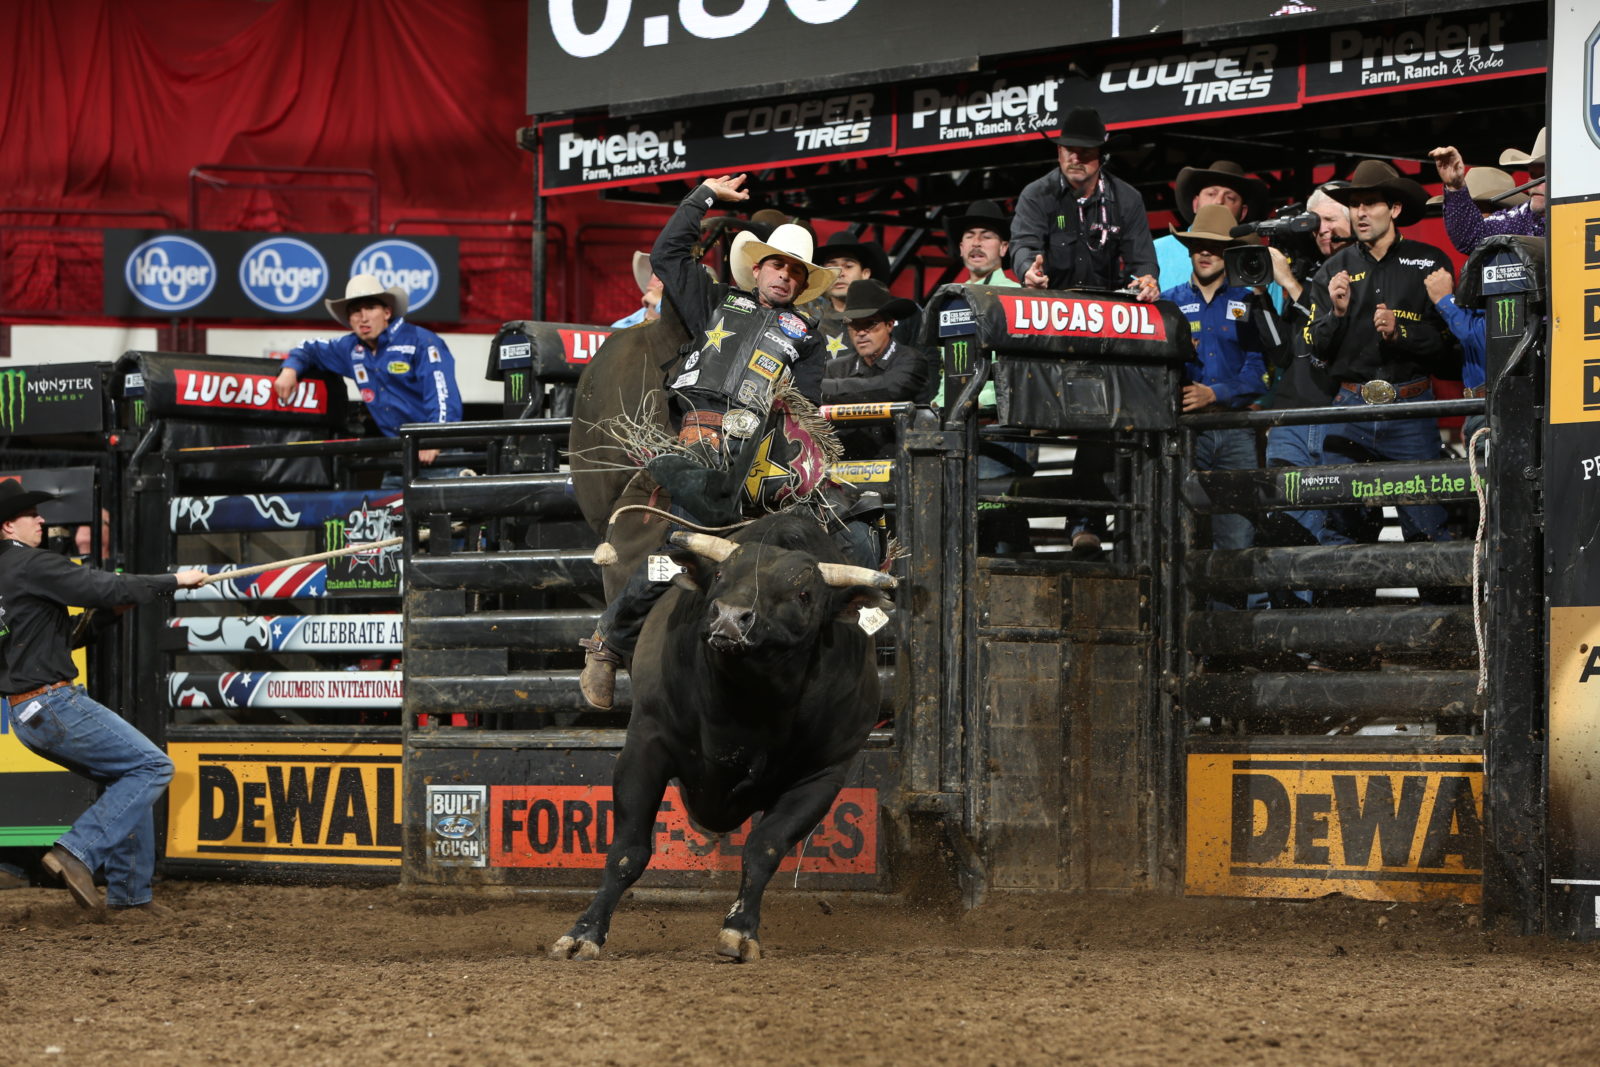 PBR to Produce CBR World Championship  & New PBR Event in 2018!